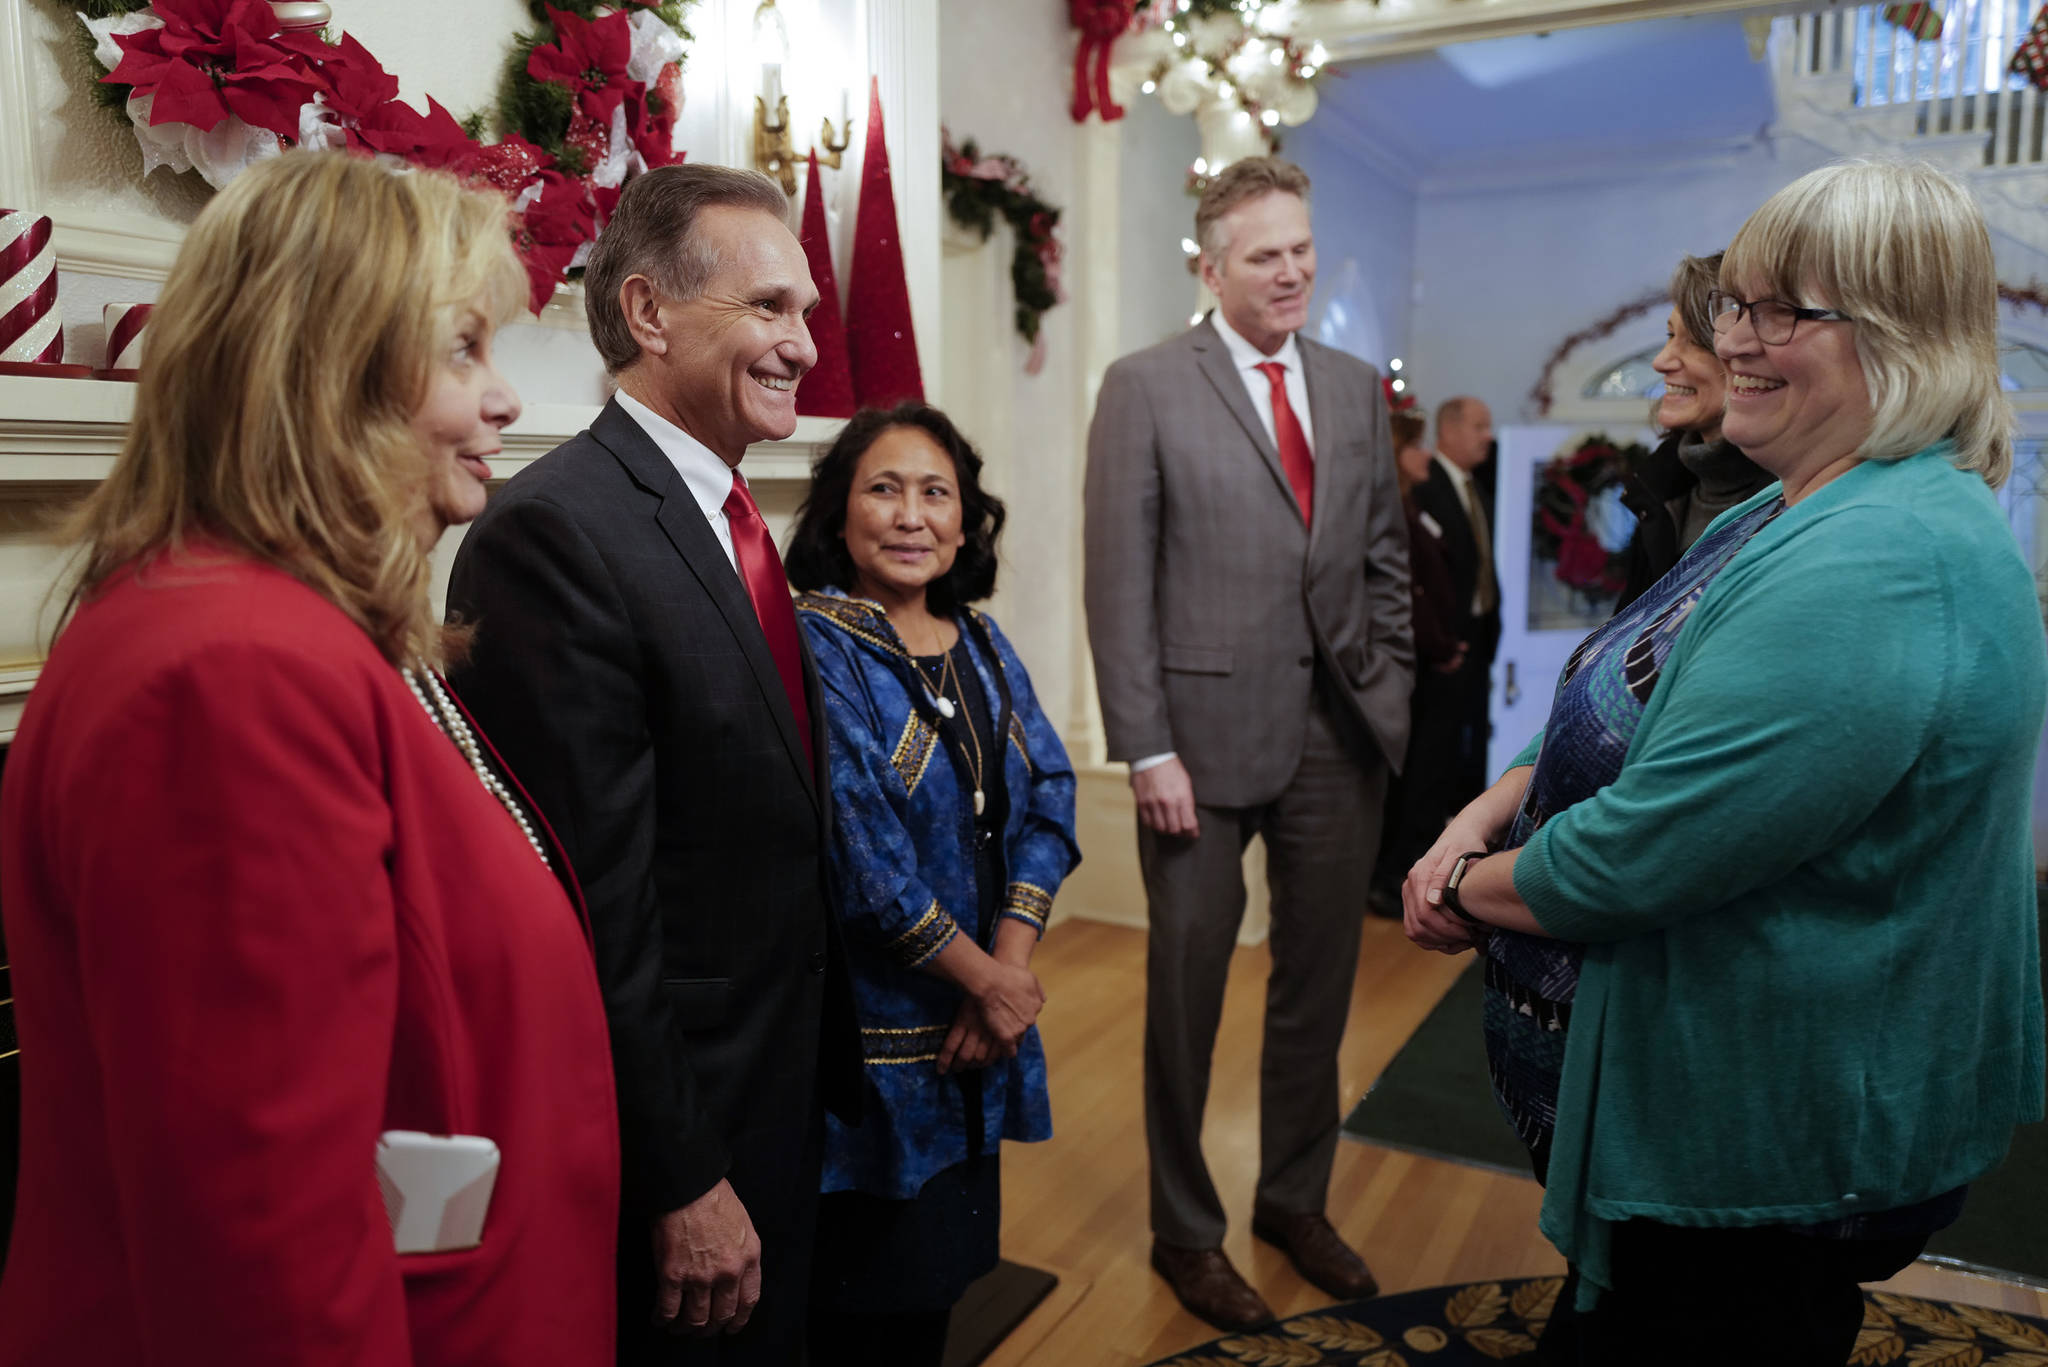 Juneau Mayor Beth Weldon, right, is greeted by Gov. Mike Dunleavy, R-Alaska, and his wife, Rose, Lt. Gov. Kevin Meyer and his wife, Marti, at the Governor’s Open House on Tuesday, Dec. 10, 2019. (Michael Penn | Juneau Empire)